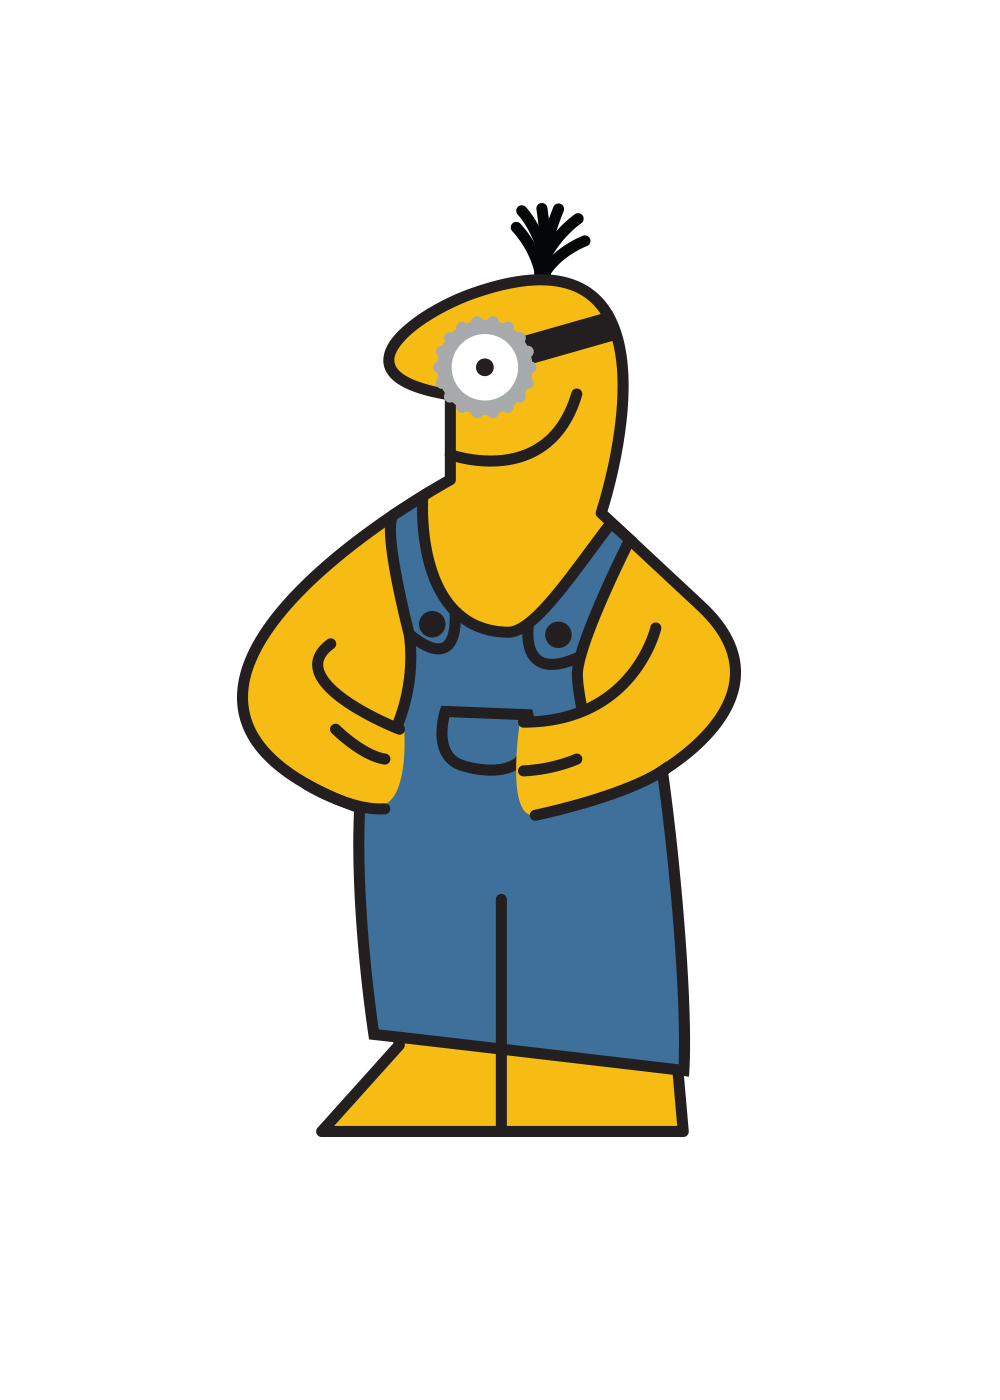 Ikea Man Turned into Pop-Culture Characters_8